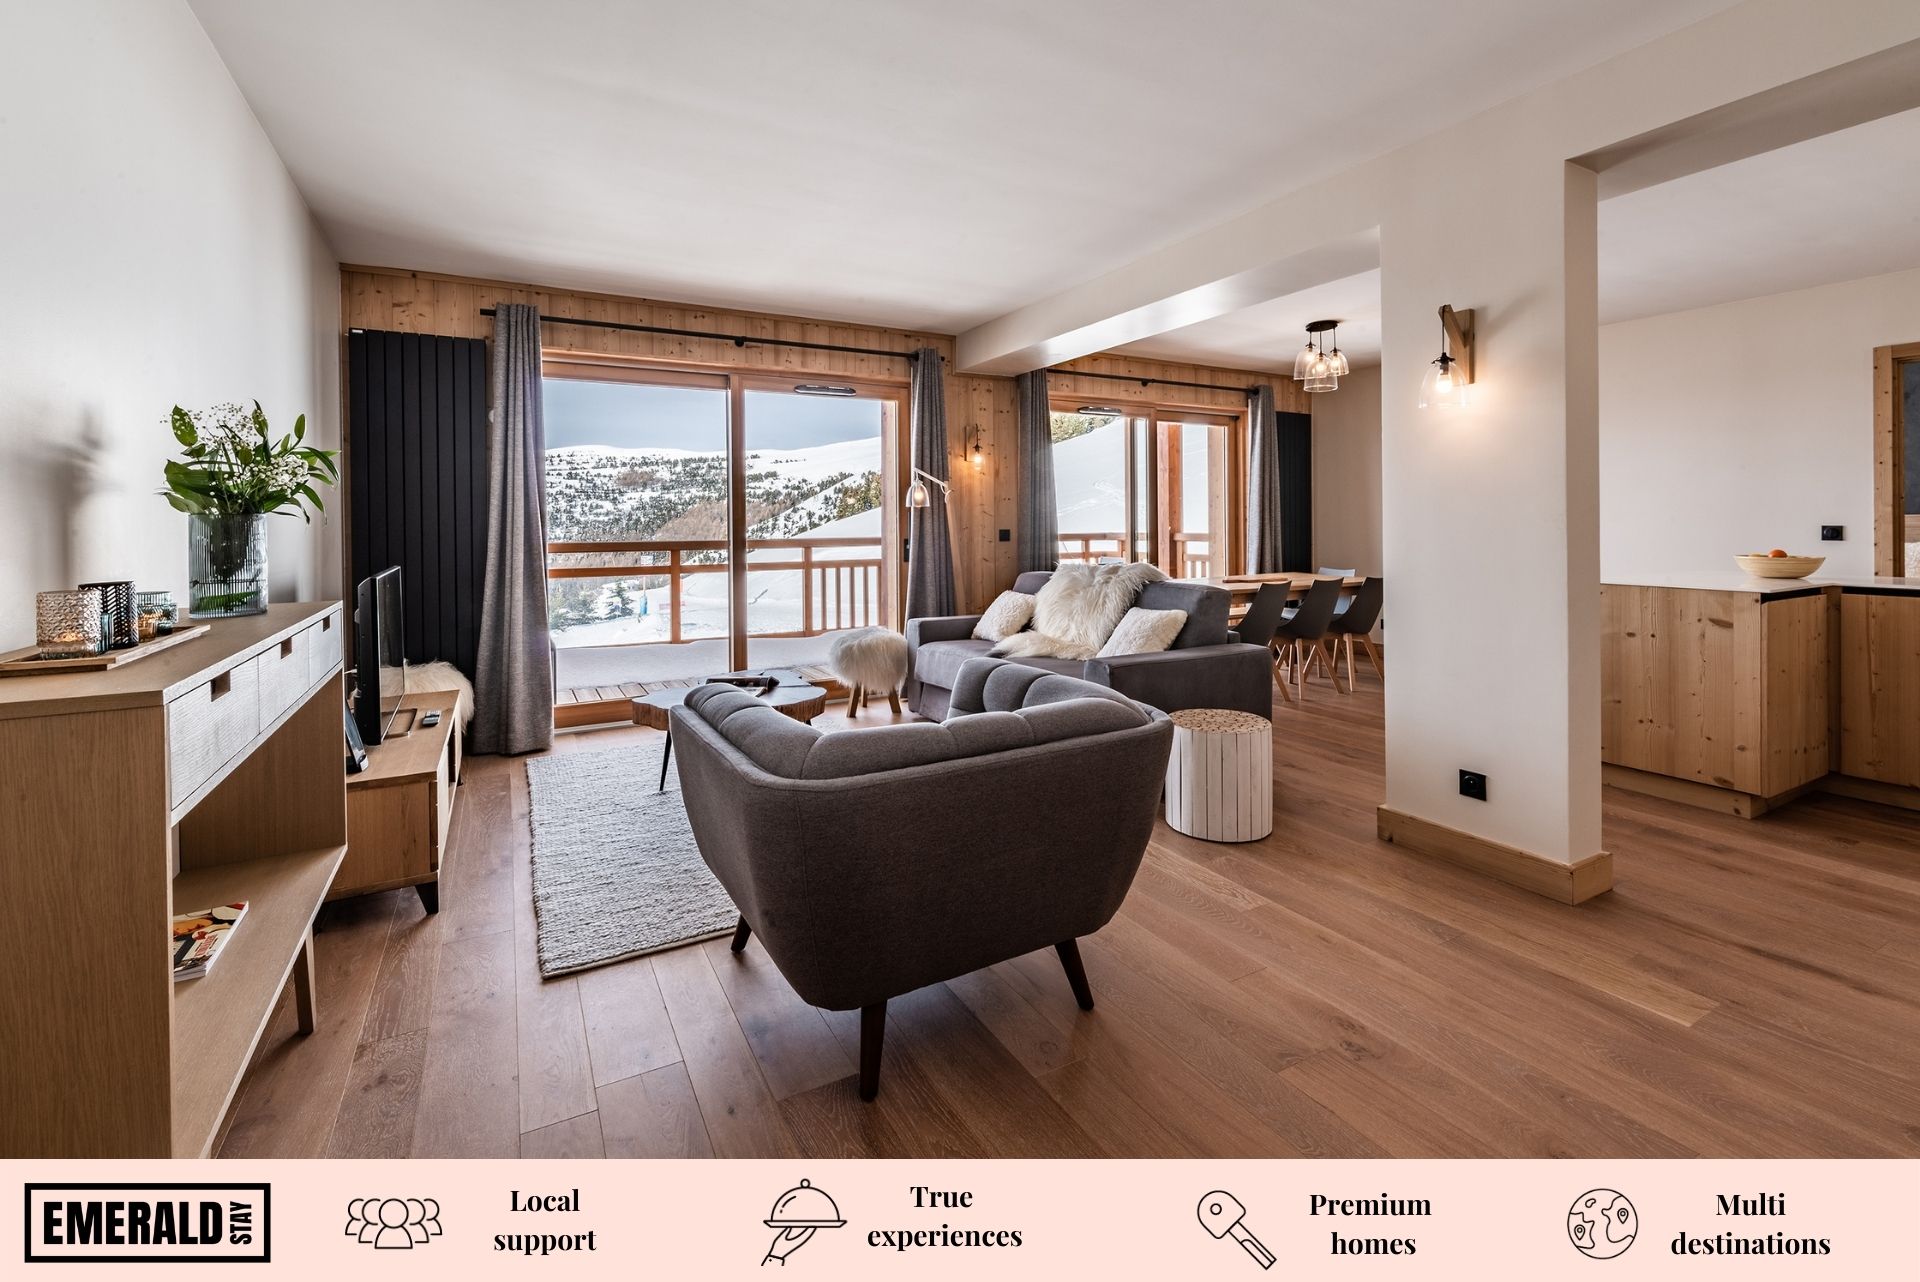 Property Image 1 - Superior Chalet in Alpe dHuez near the Fantastic Slopes